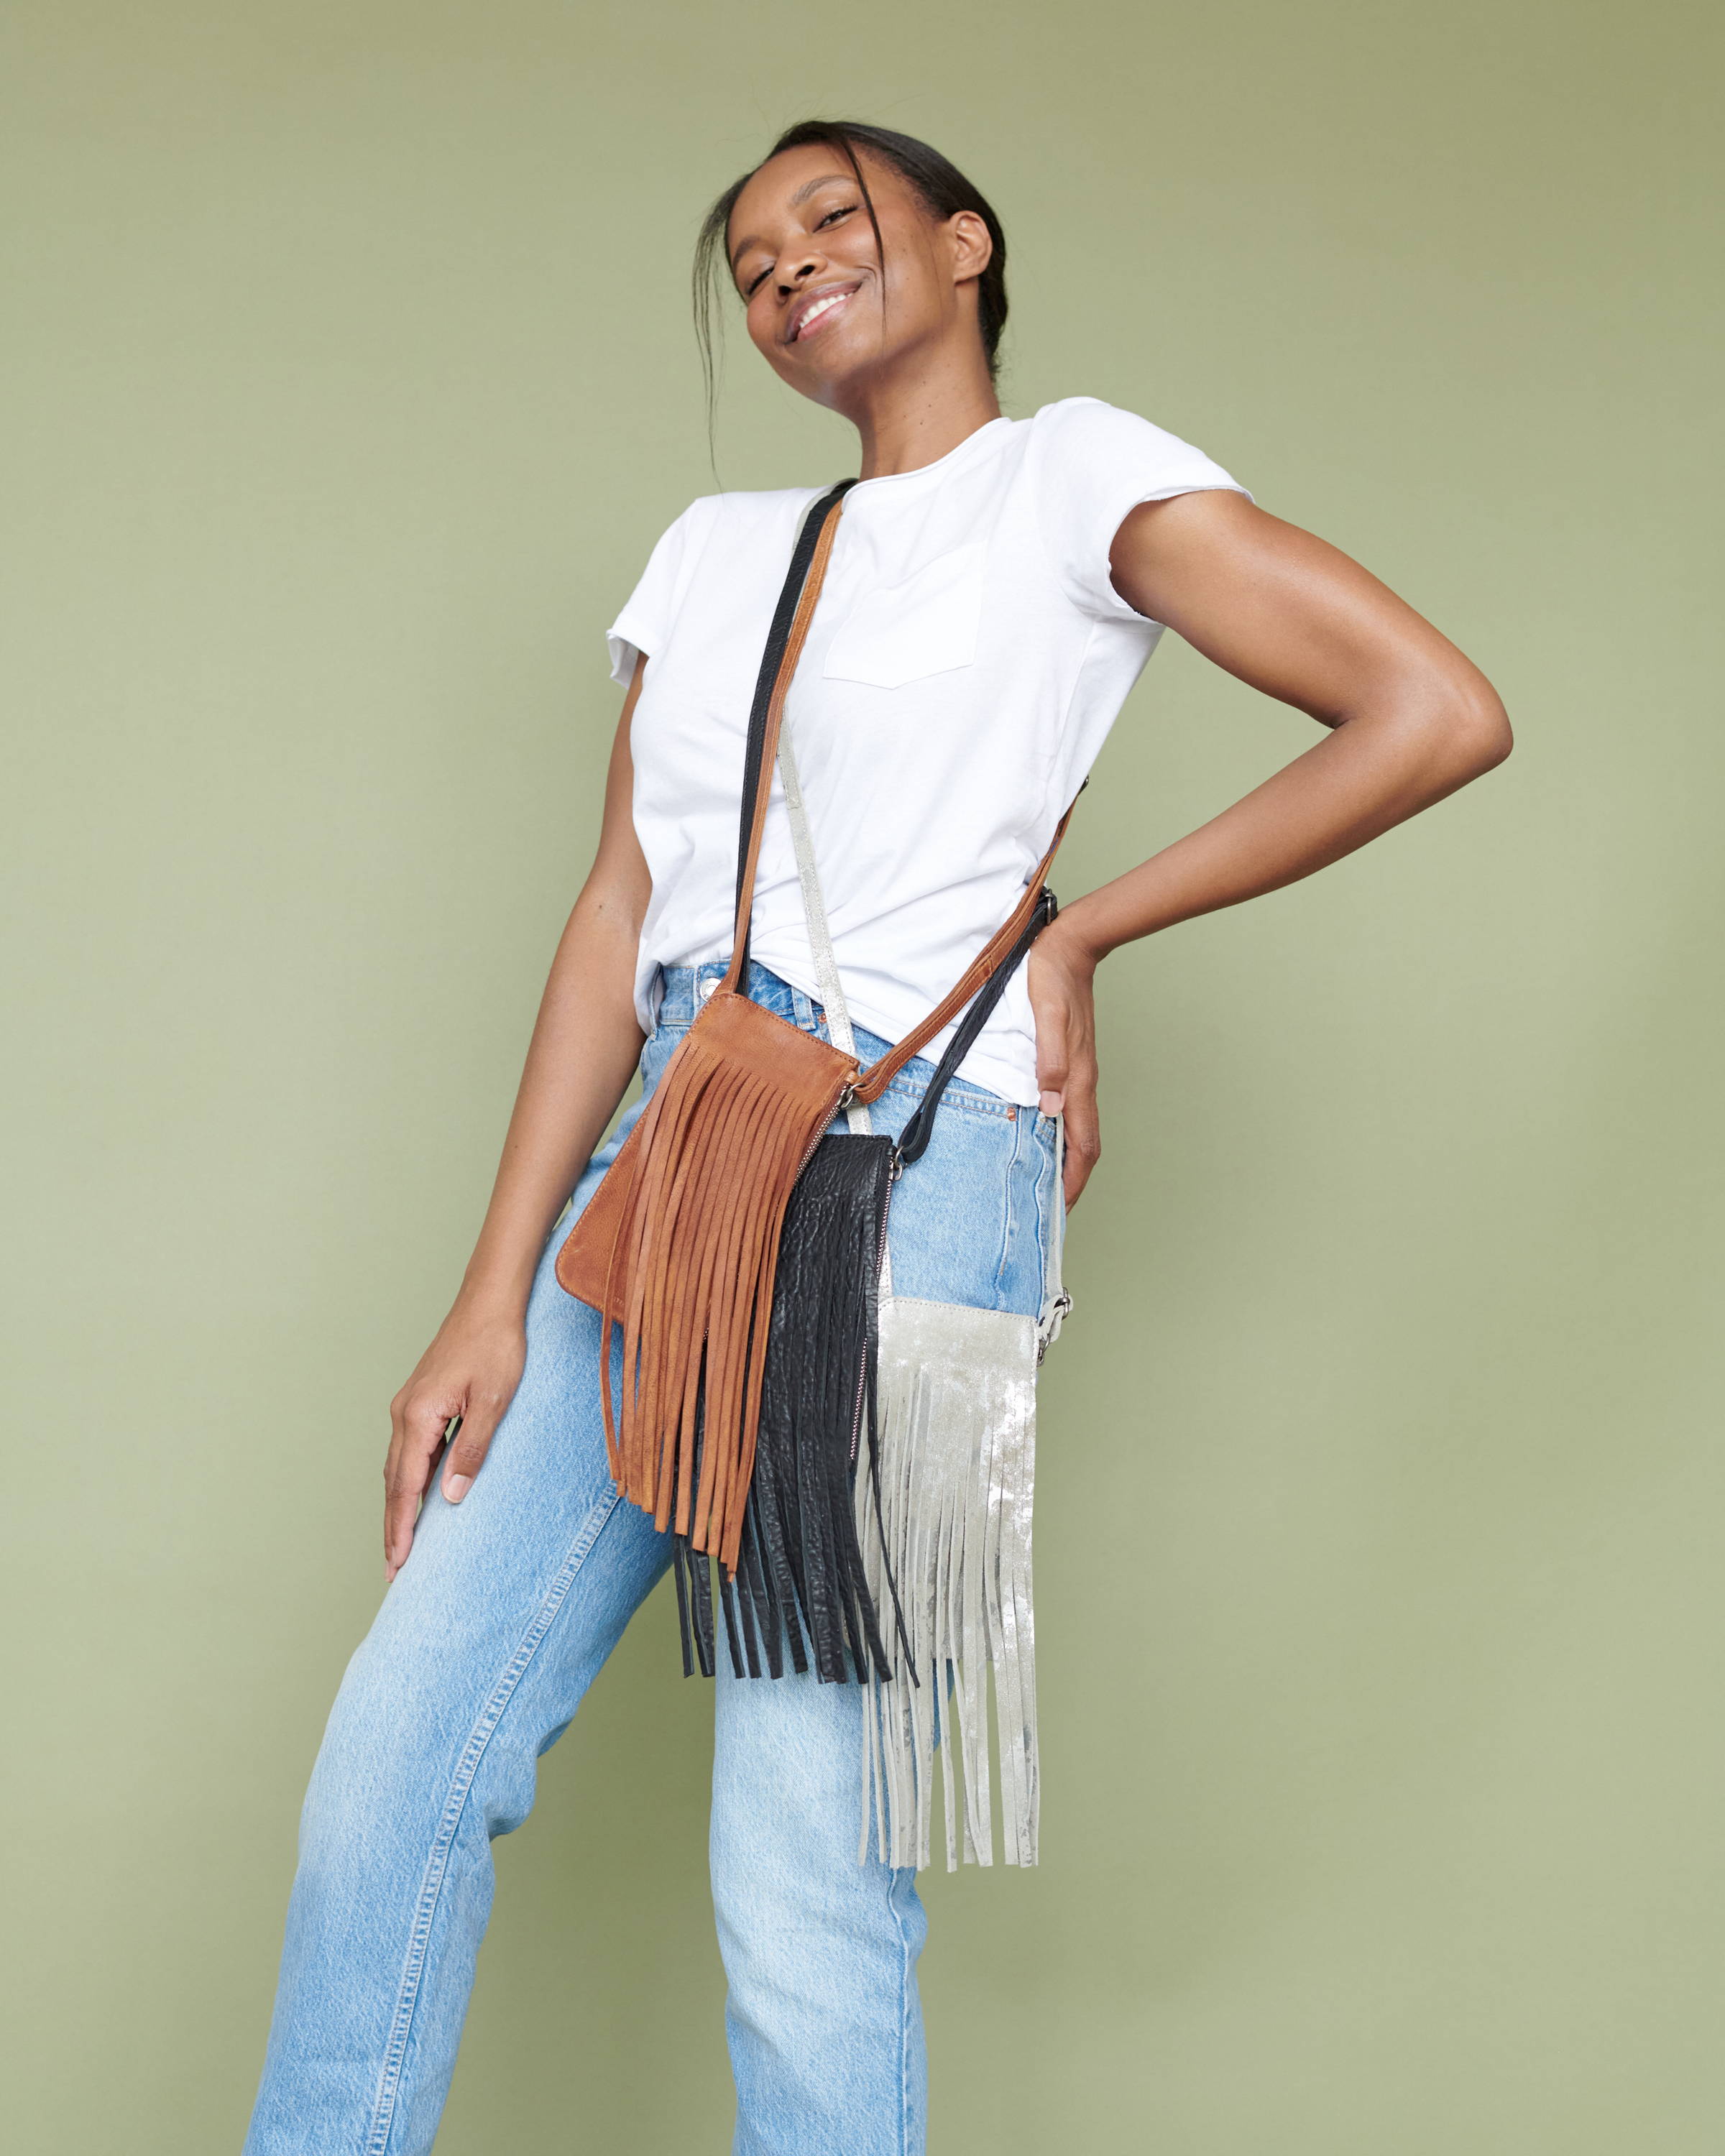 Ways to Wear a Mini Crossbody Bag That's Trending Right Now – Latico  Leathers